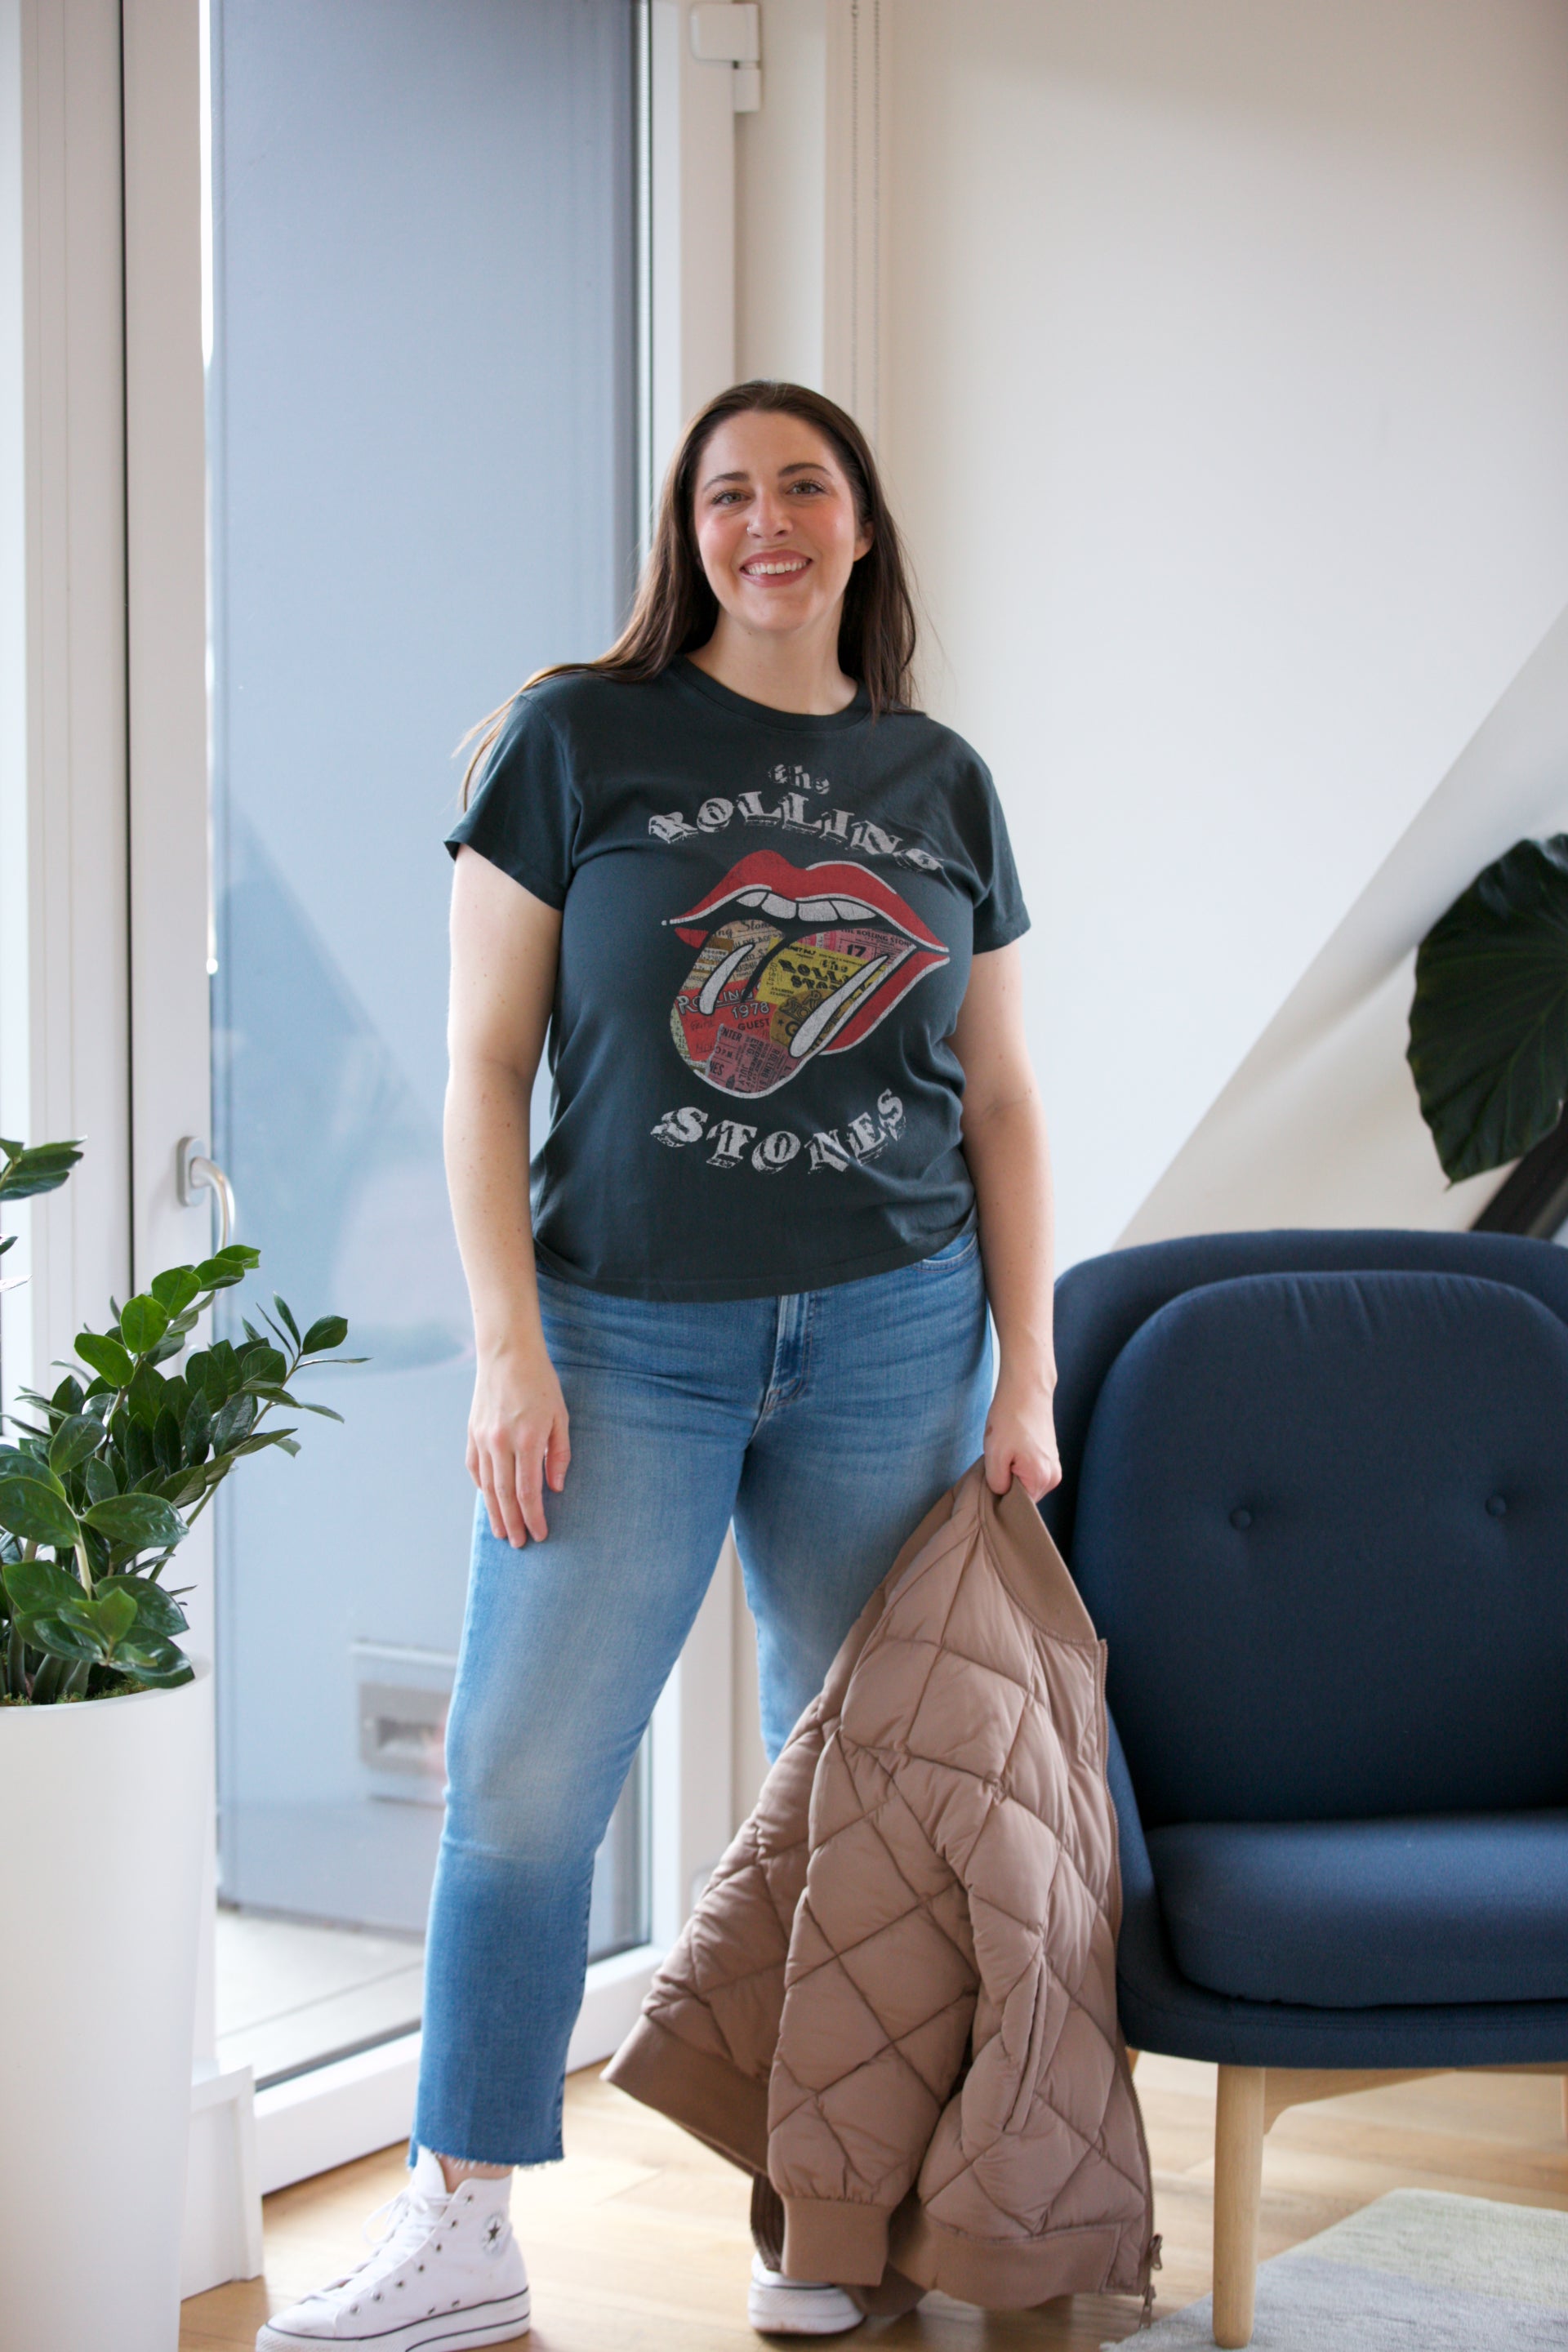 DAYDREAMER Rolling Stones Ticket Tongue Tour Tee